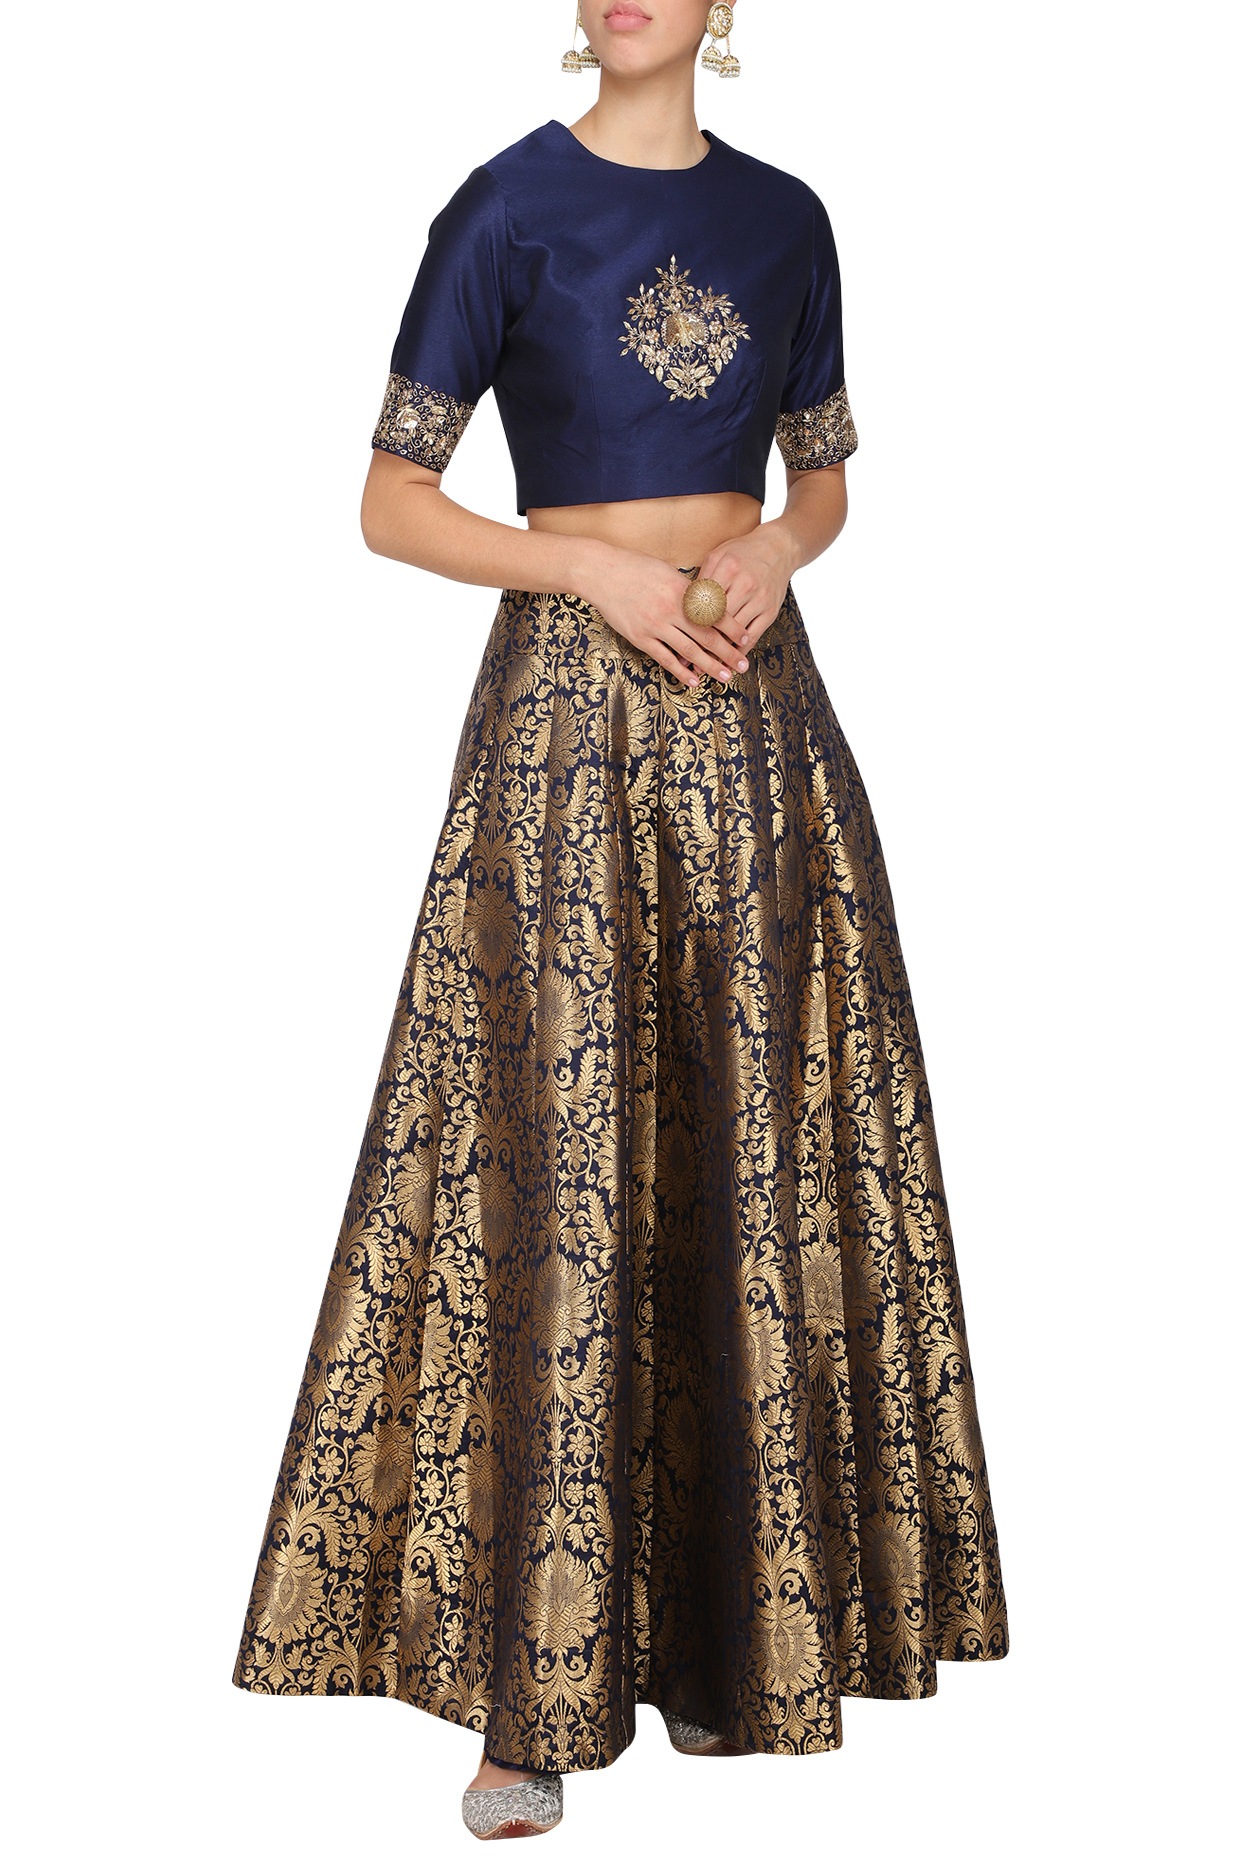 Elegant Navy and Gold Crop Top Style Lehenga-SNT11091 – Saris and Things